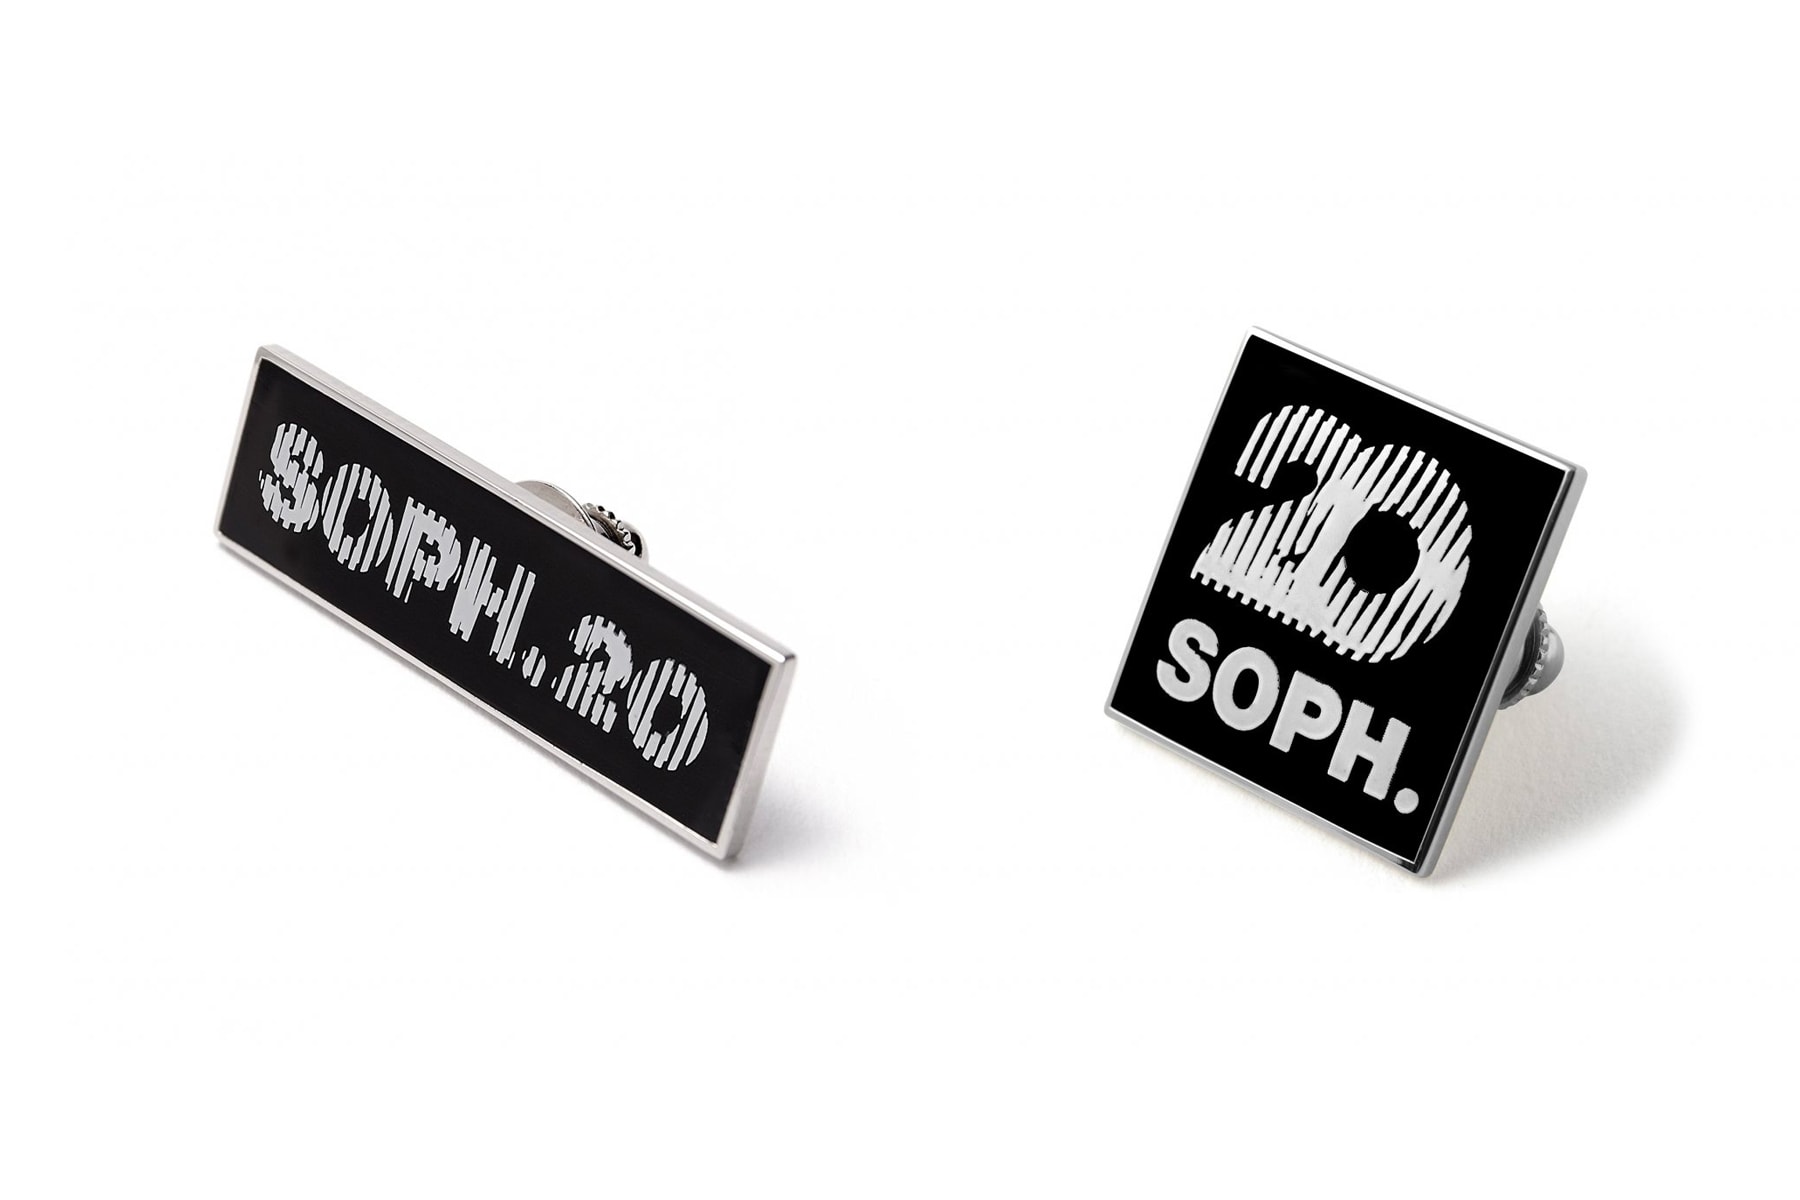 SOPH. 20th Anniversary SOPH.20 online exclusive brand outerwear shirts hats bags accessories Tom Hingston